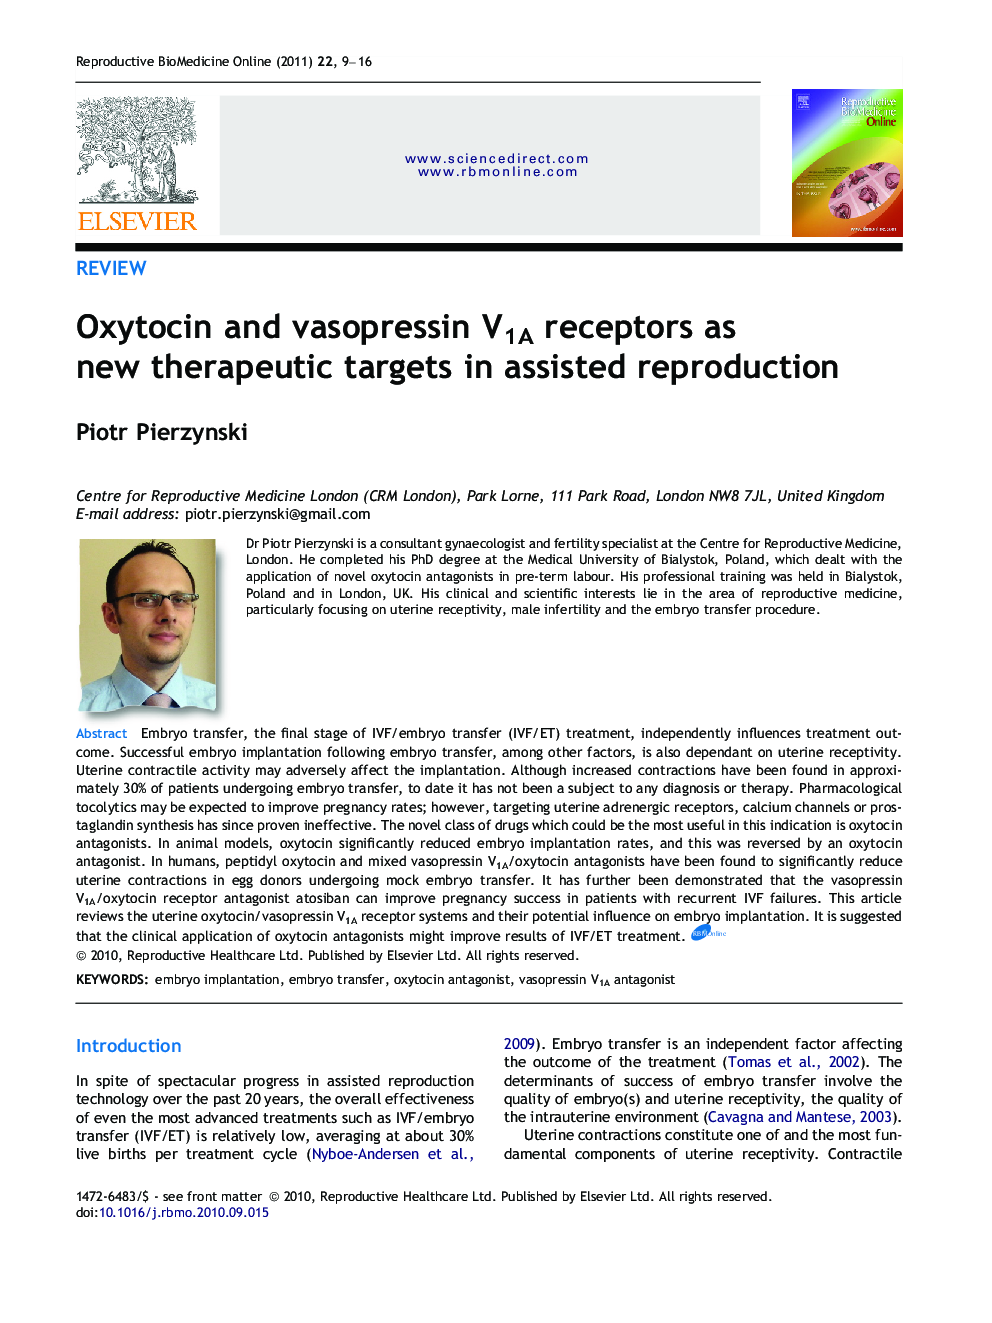 Oxytocin and vasopressin V1A receptors as new therapeutic targets in assisted reproduction 